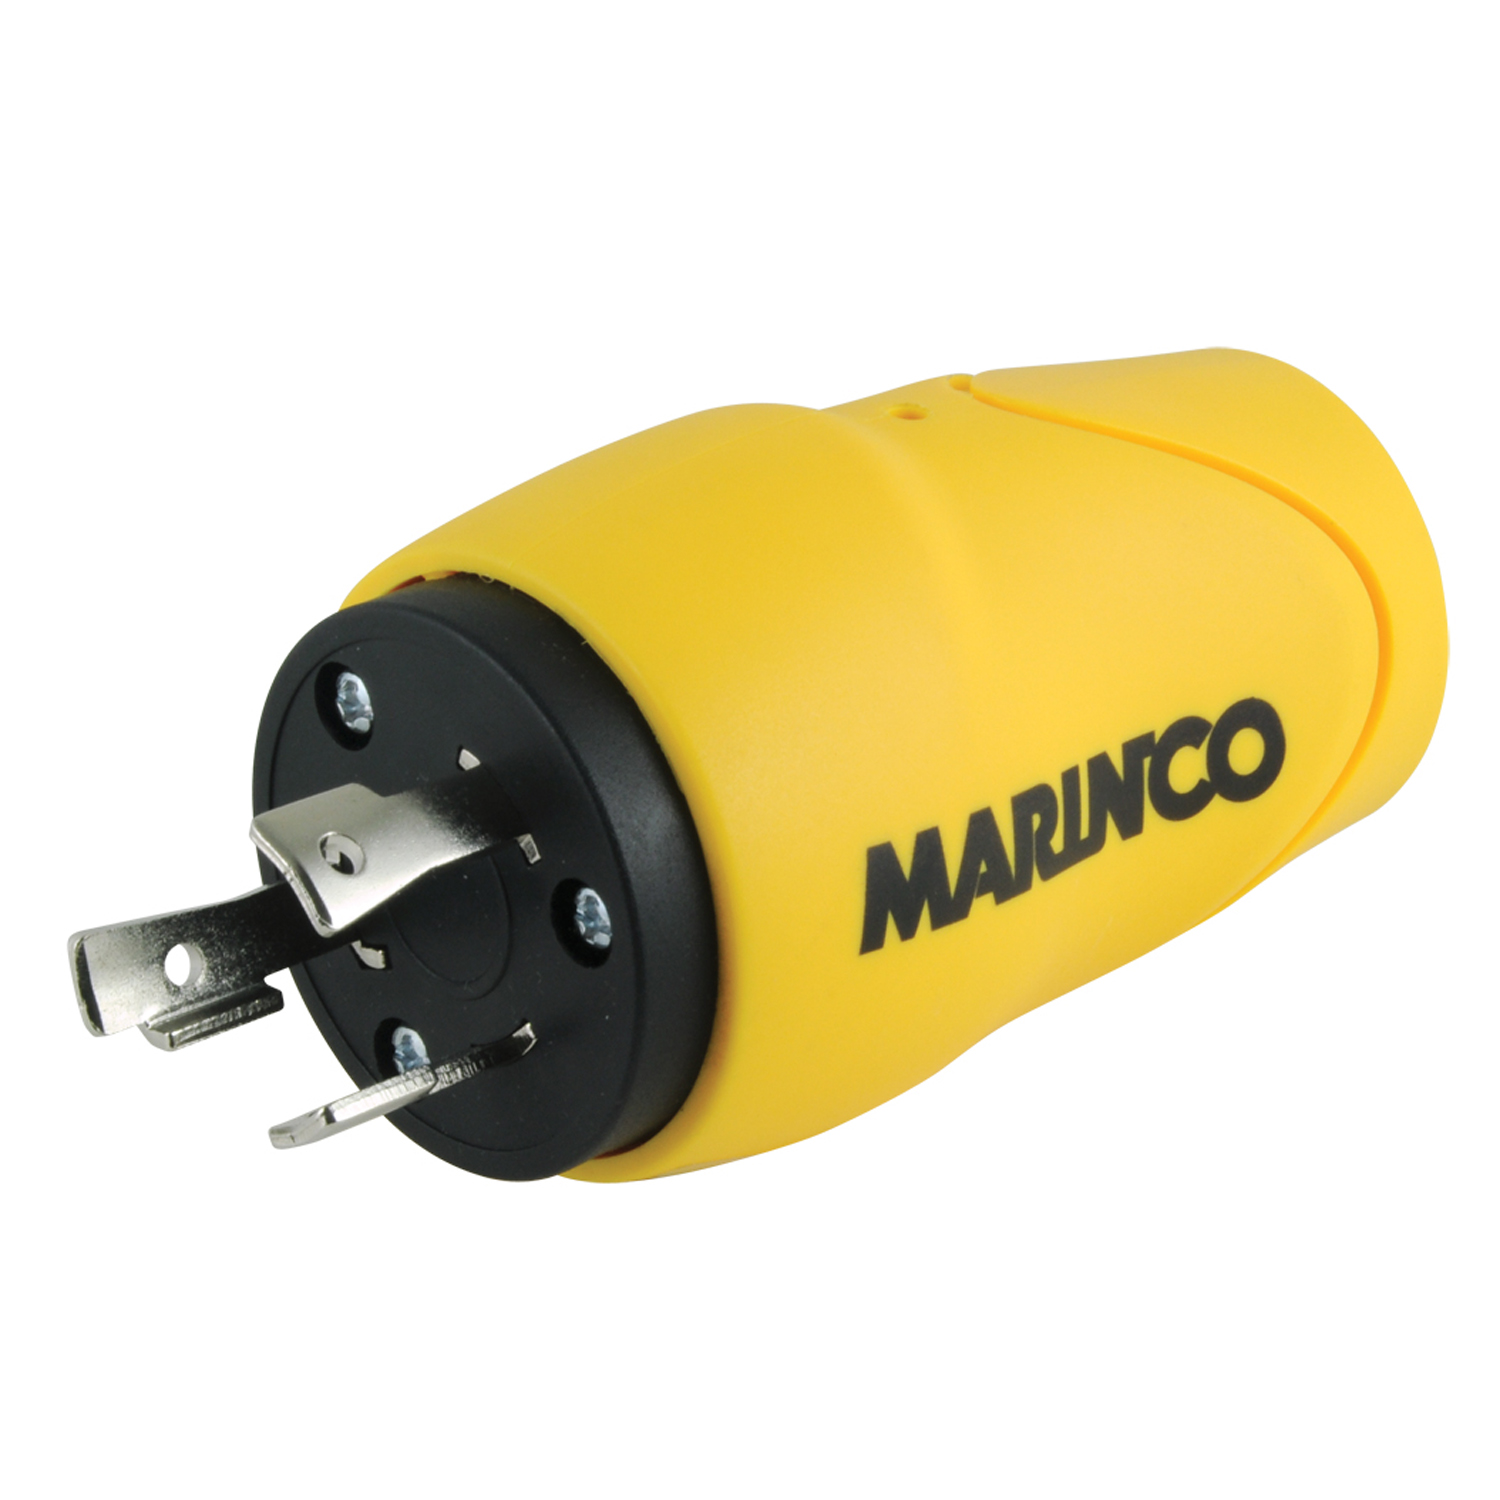 Marinco 104SPP 30A Shore Power Pigtail Adapter 